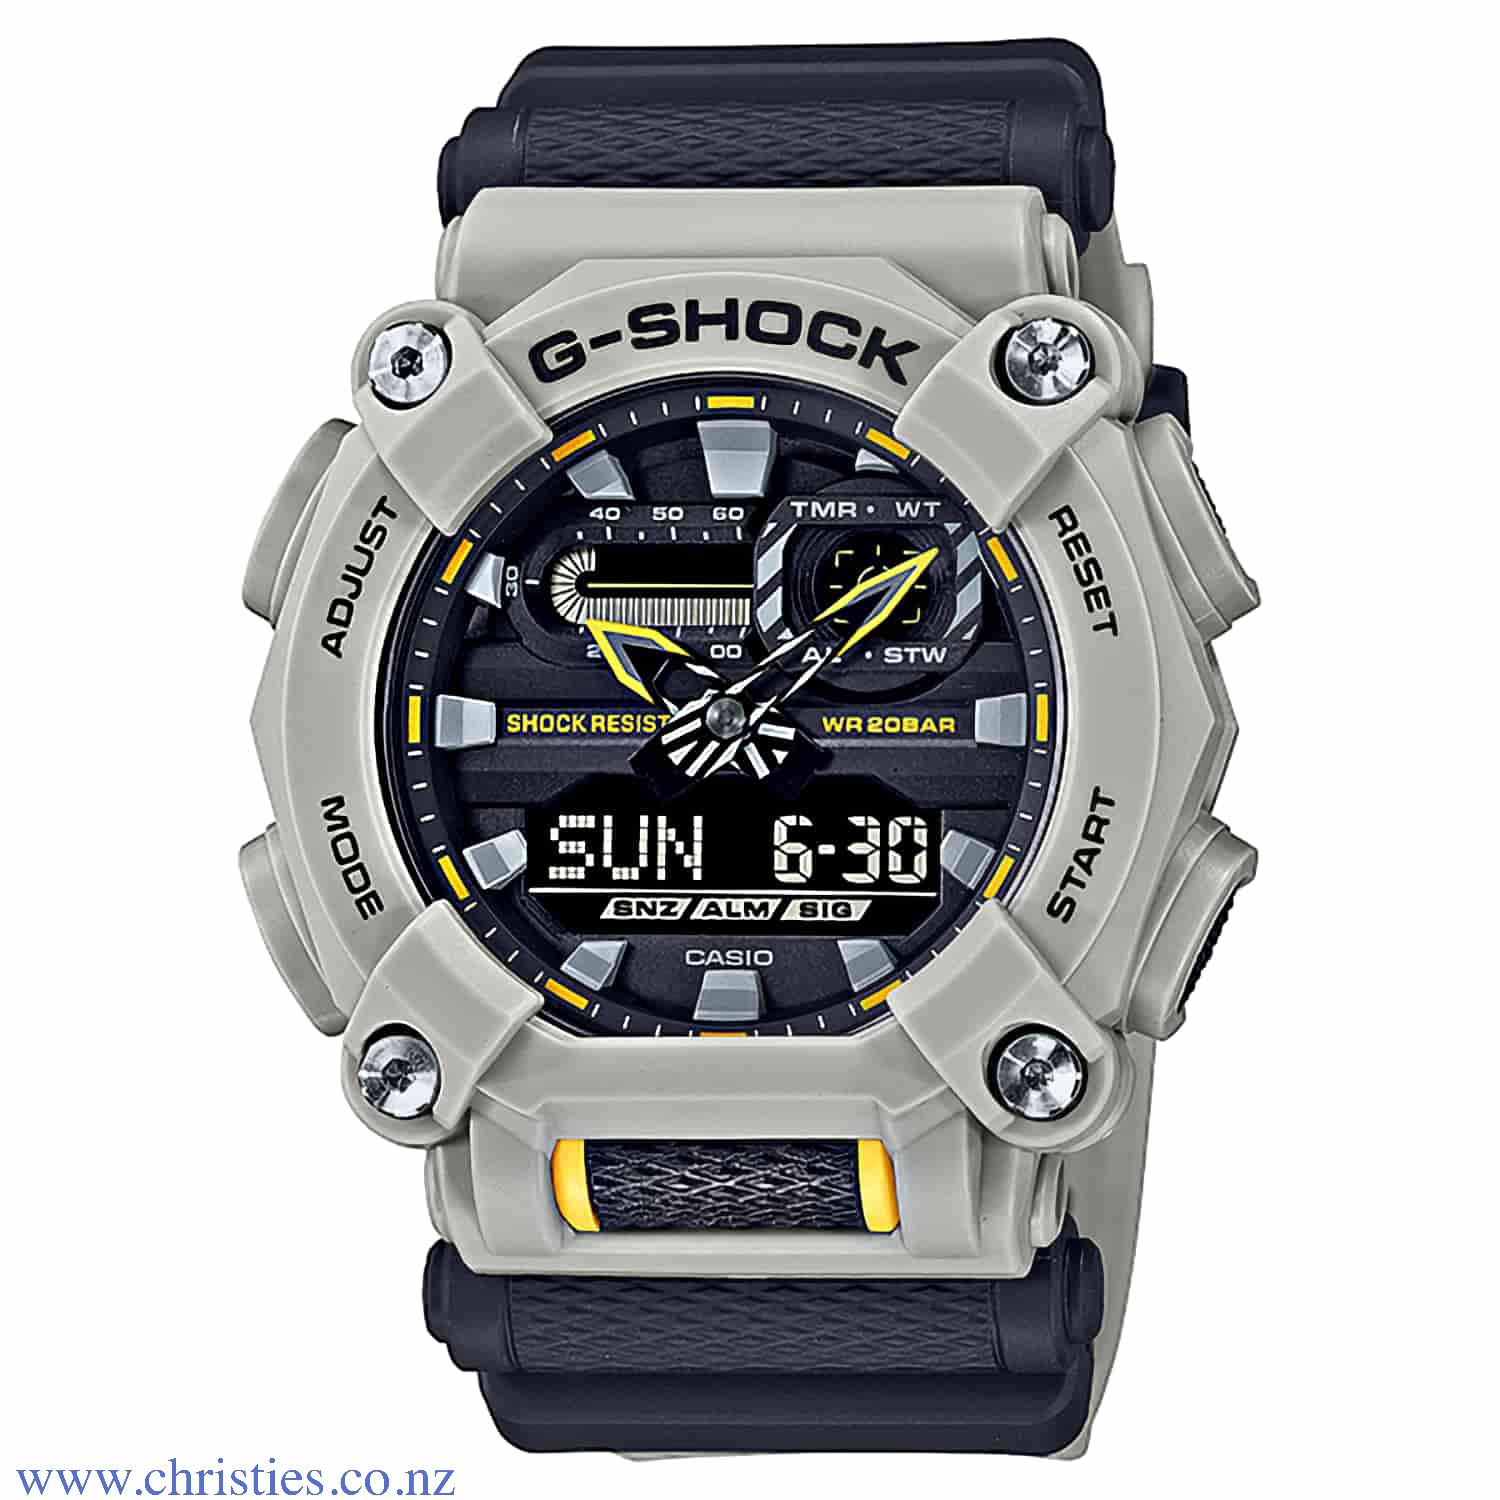 GA900HC-5A Casio G-Shock Watch Hidden Coast Series. HIDDEN COAST Theme Series - This new colour model was designed under the theme of exploration of an unknown coastal region. This new lineup is based on the powerful GA-900. The GA-900HC is made entirely 